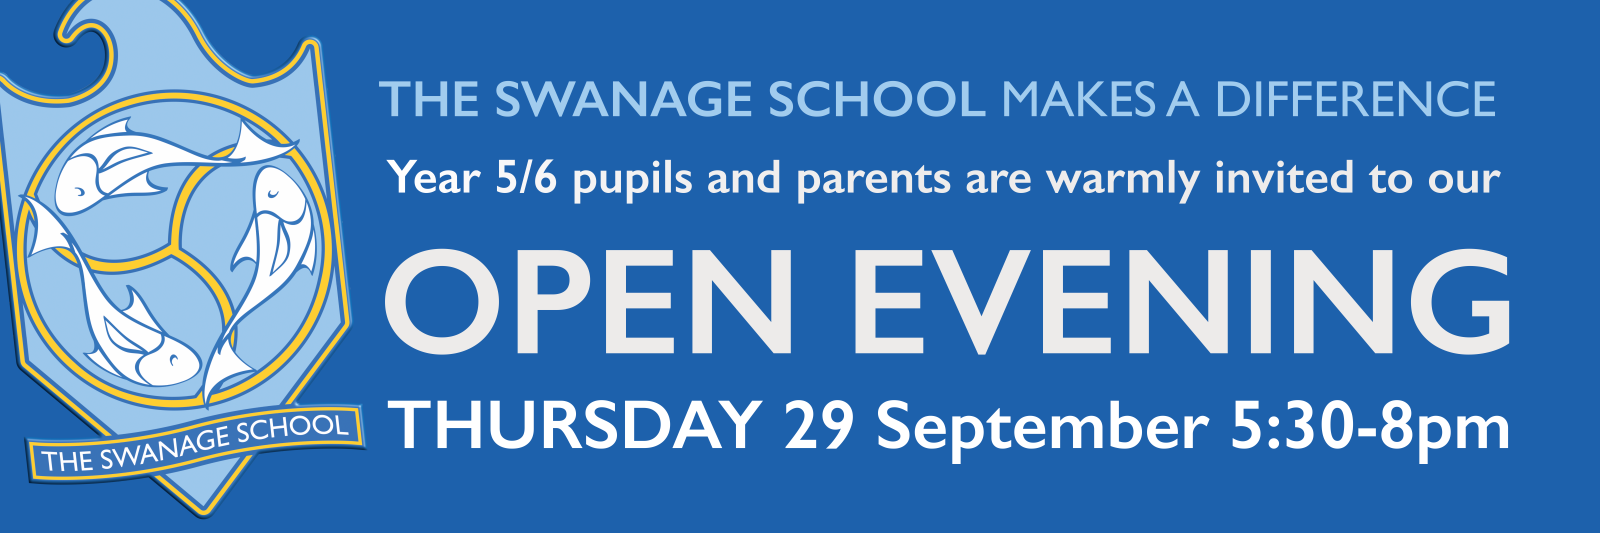 Banner advertising The Swanage School Open Evening on Thursday 29 September 2022 at 5.30pm